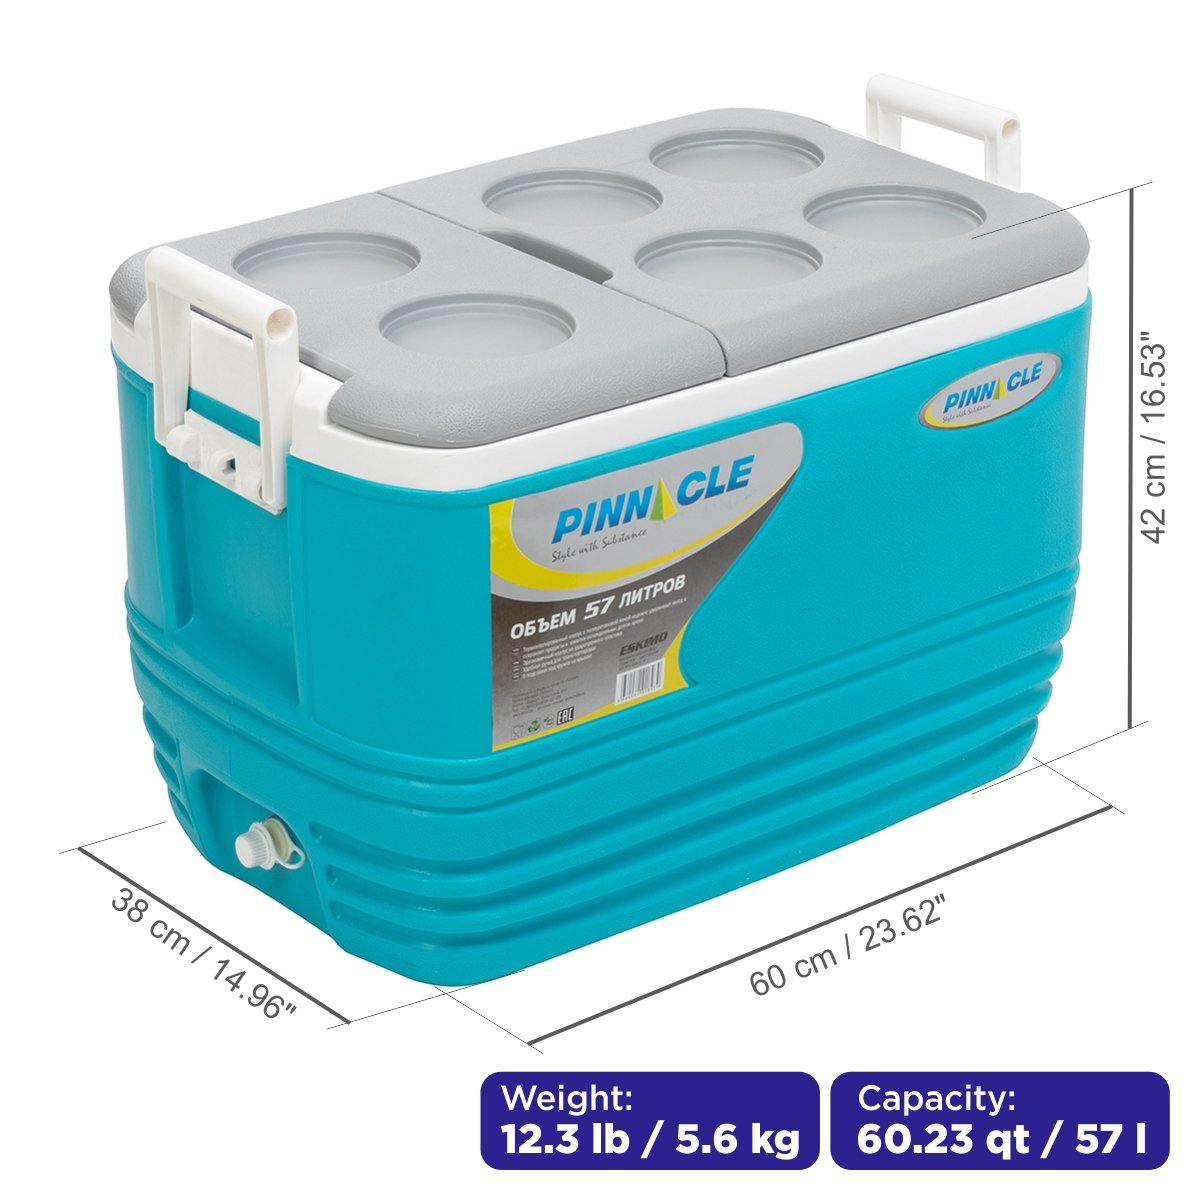 Eskimo Large Ice Chest with Side Handle, Drain Plug and 6 Cup Holders, 60 qt is 23.6 inches long, 15 inches wide and 16.5 inches high, weighing 12.3 lbs